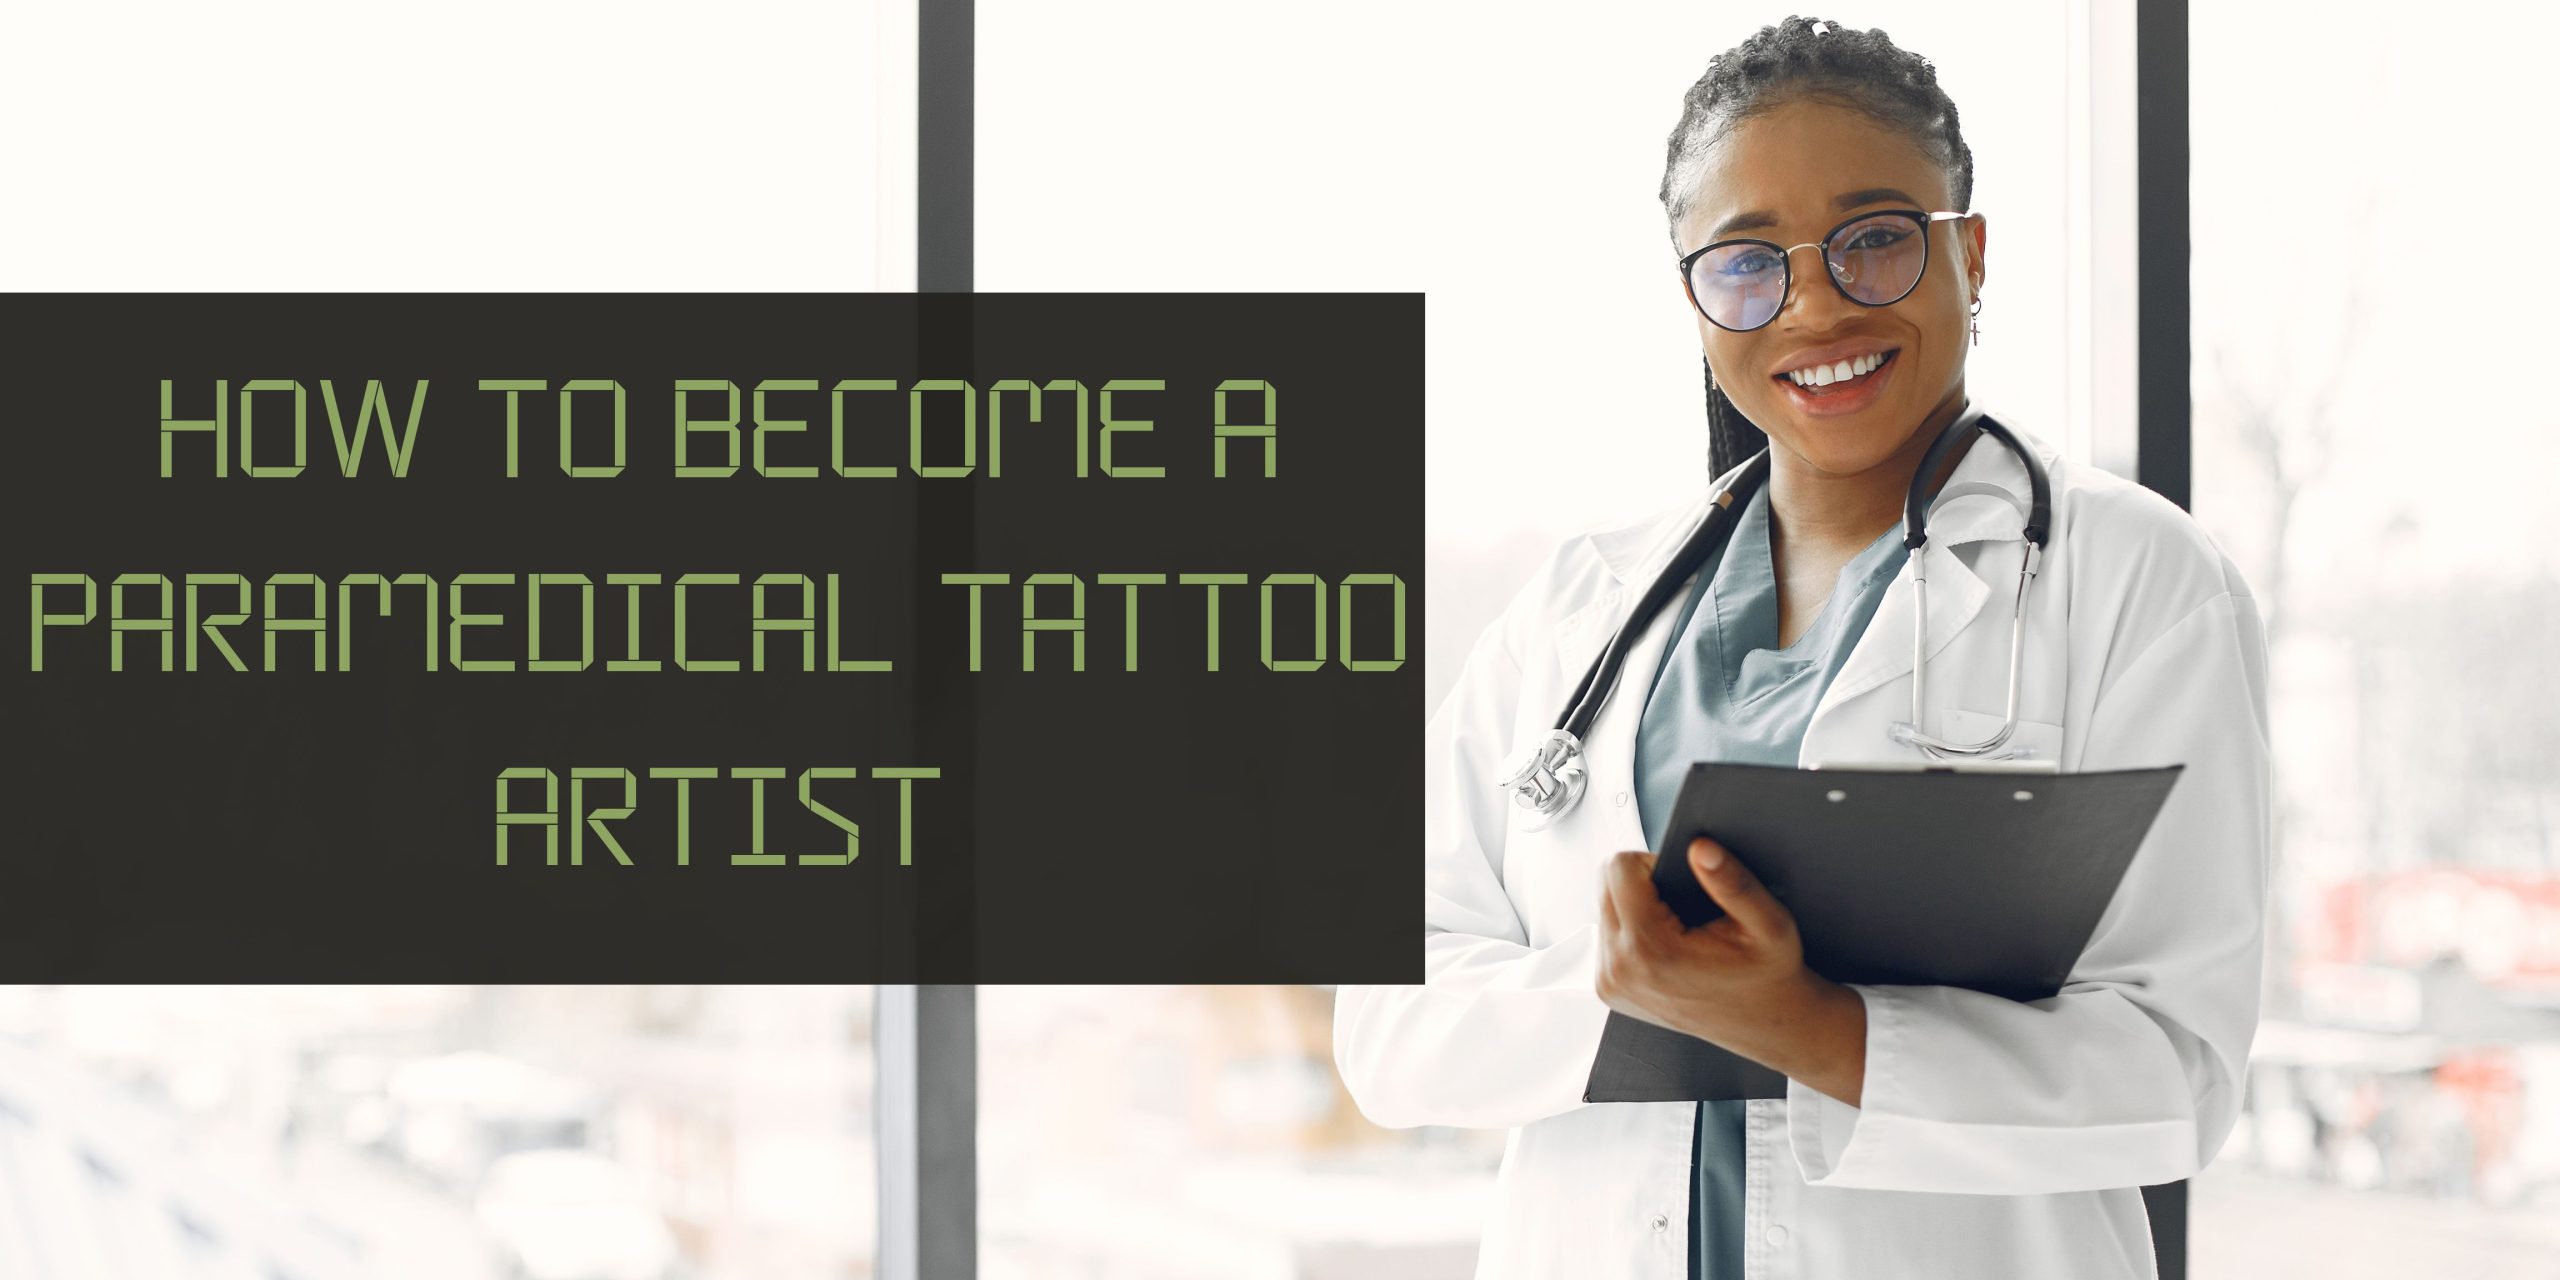 How to become a paramedical tattoo artist